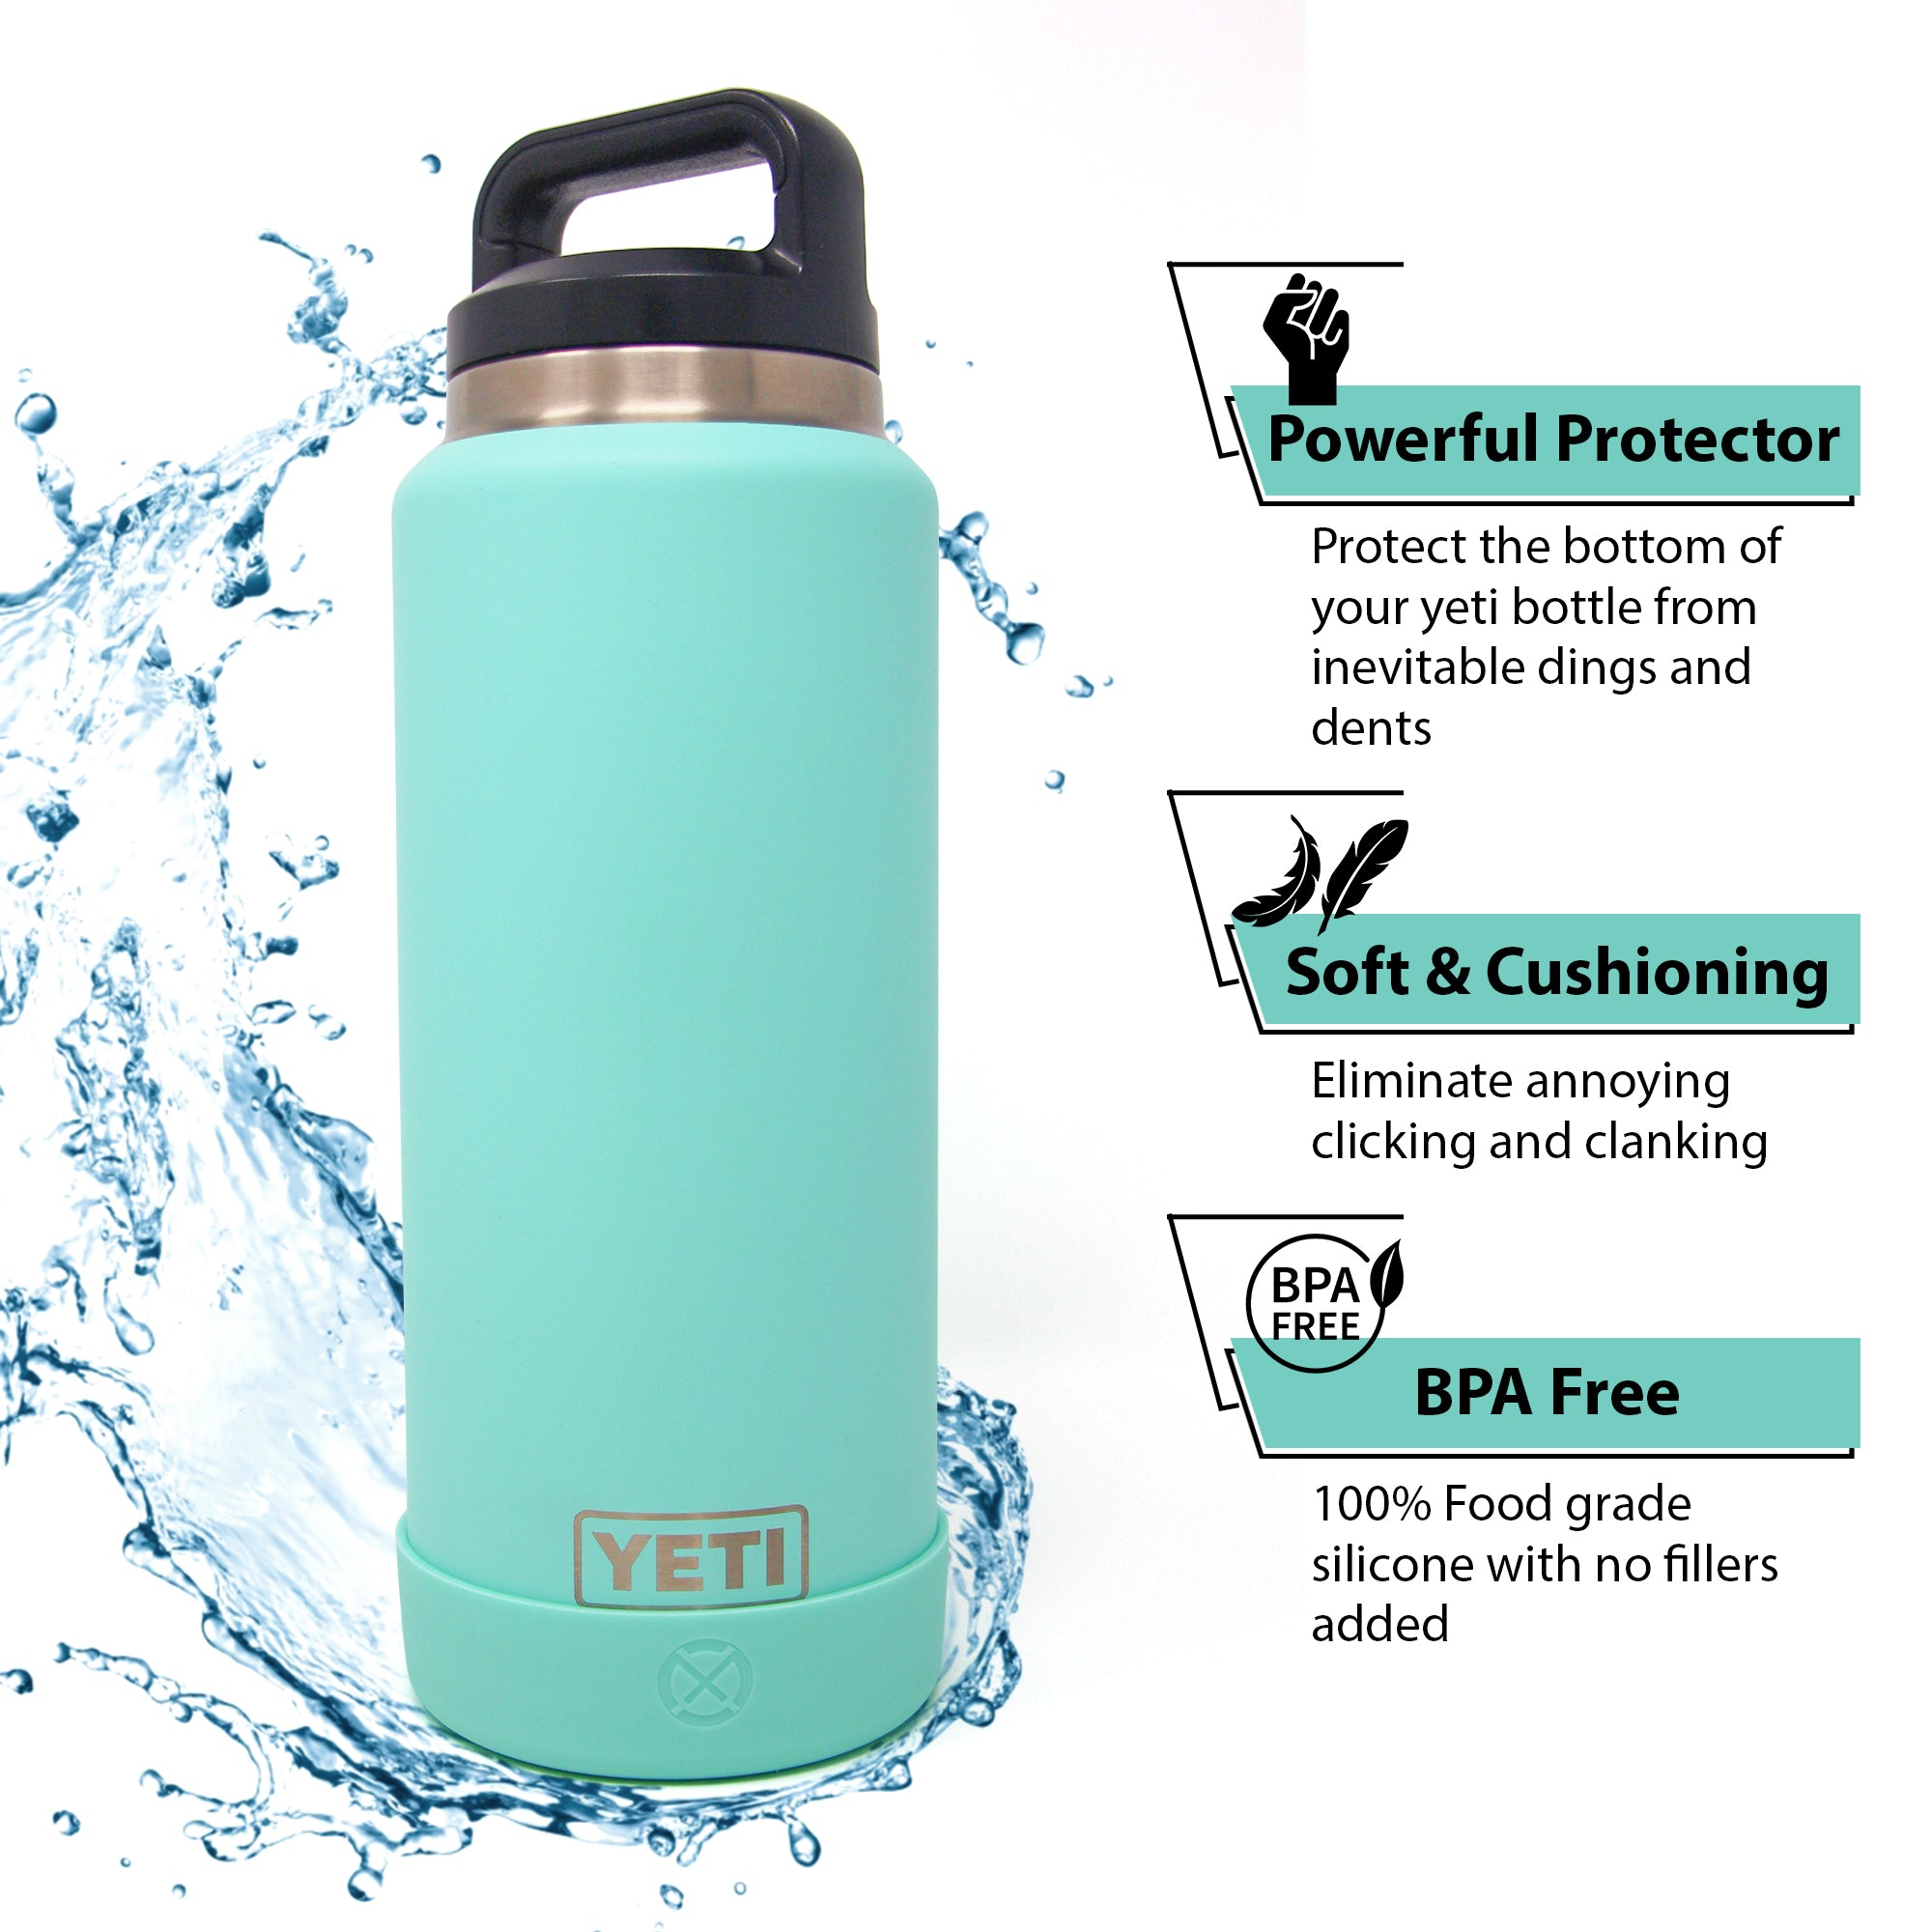 Protective Boot compatible with YETI Ramblers - 12oz to 1 Gallon Sizes